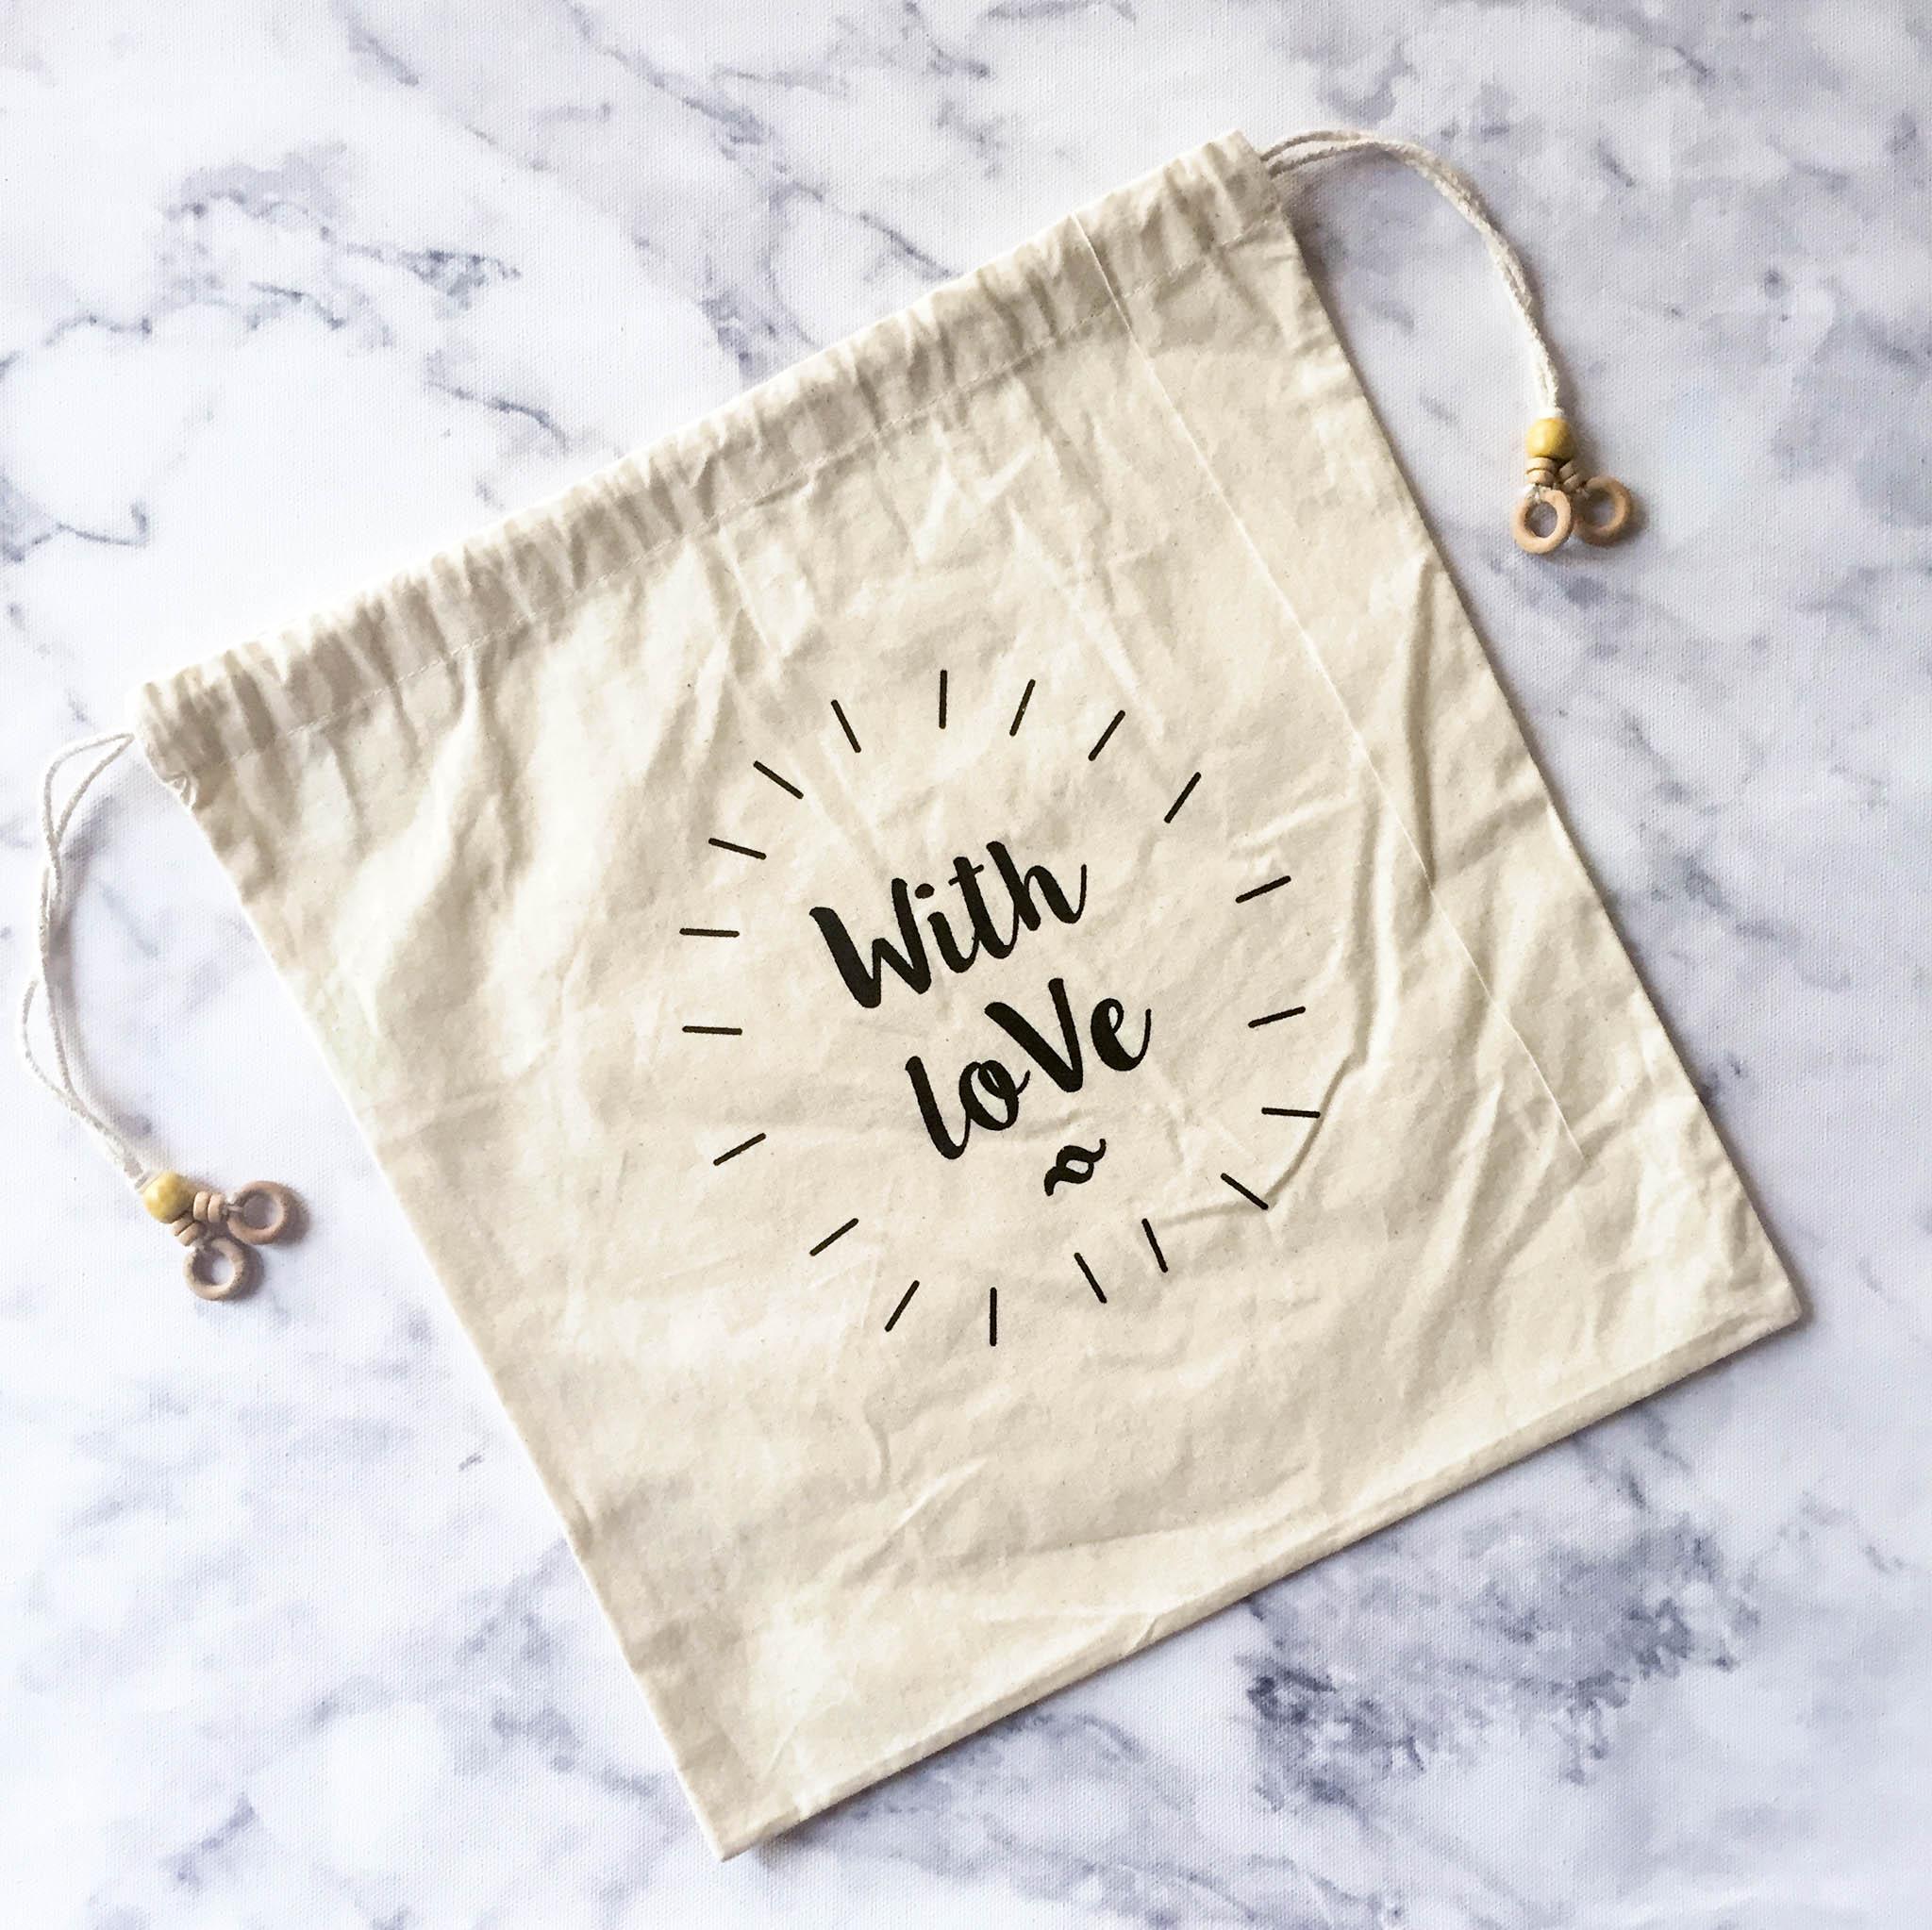 WITH LOVE GIFT BAG - left-handesign